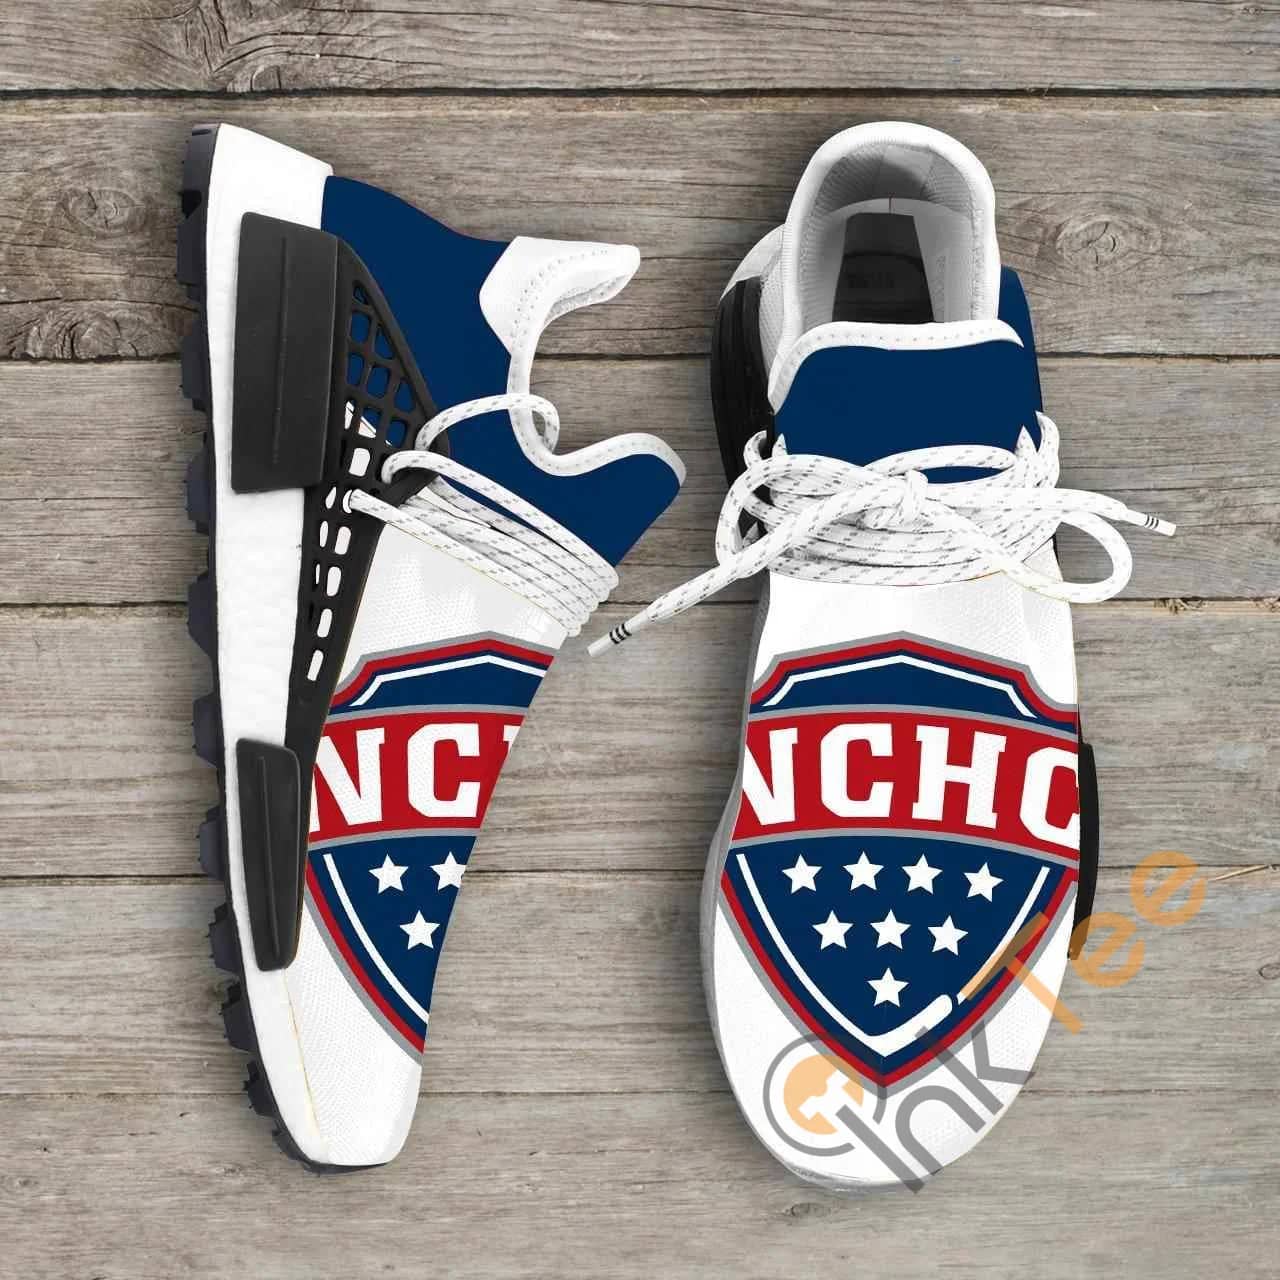 National Collegiate Hockey Conference Ncaa NMD Human Shoes